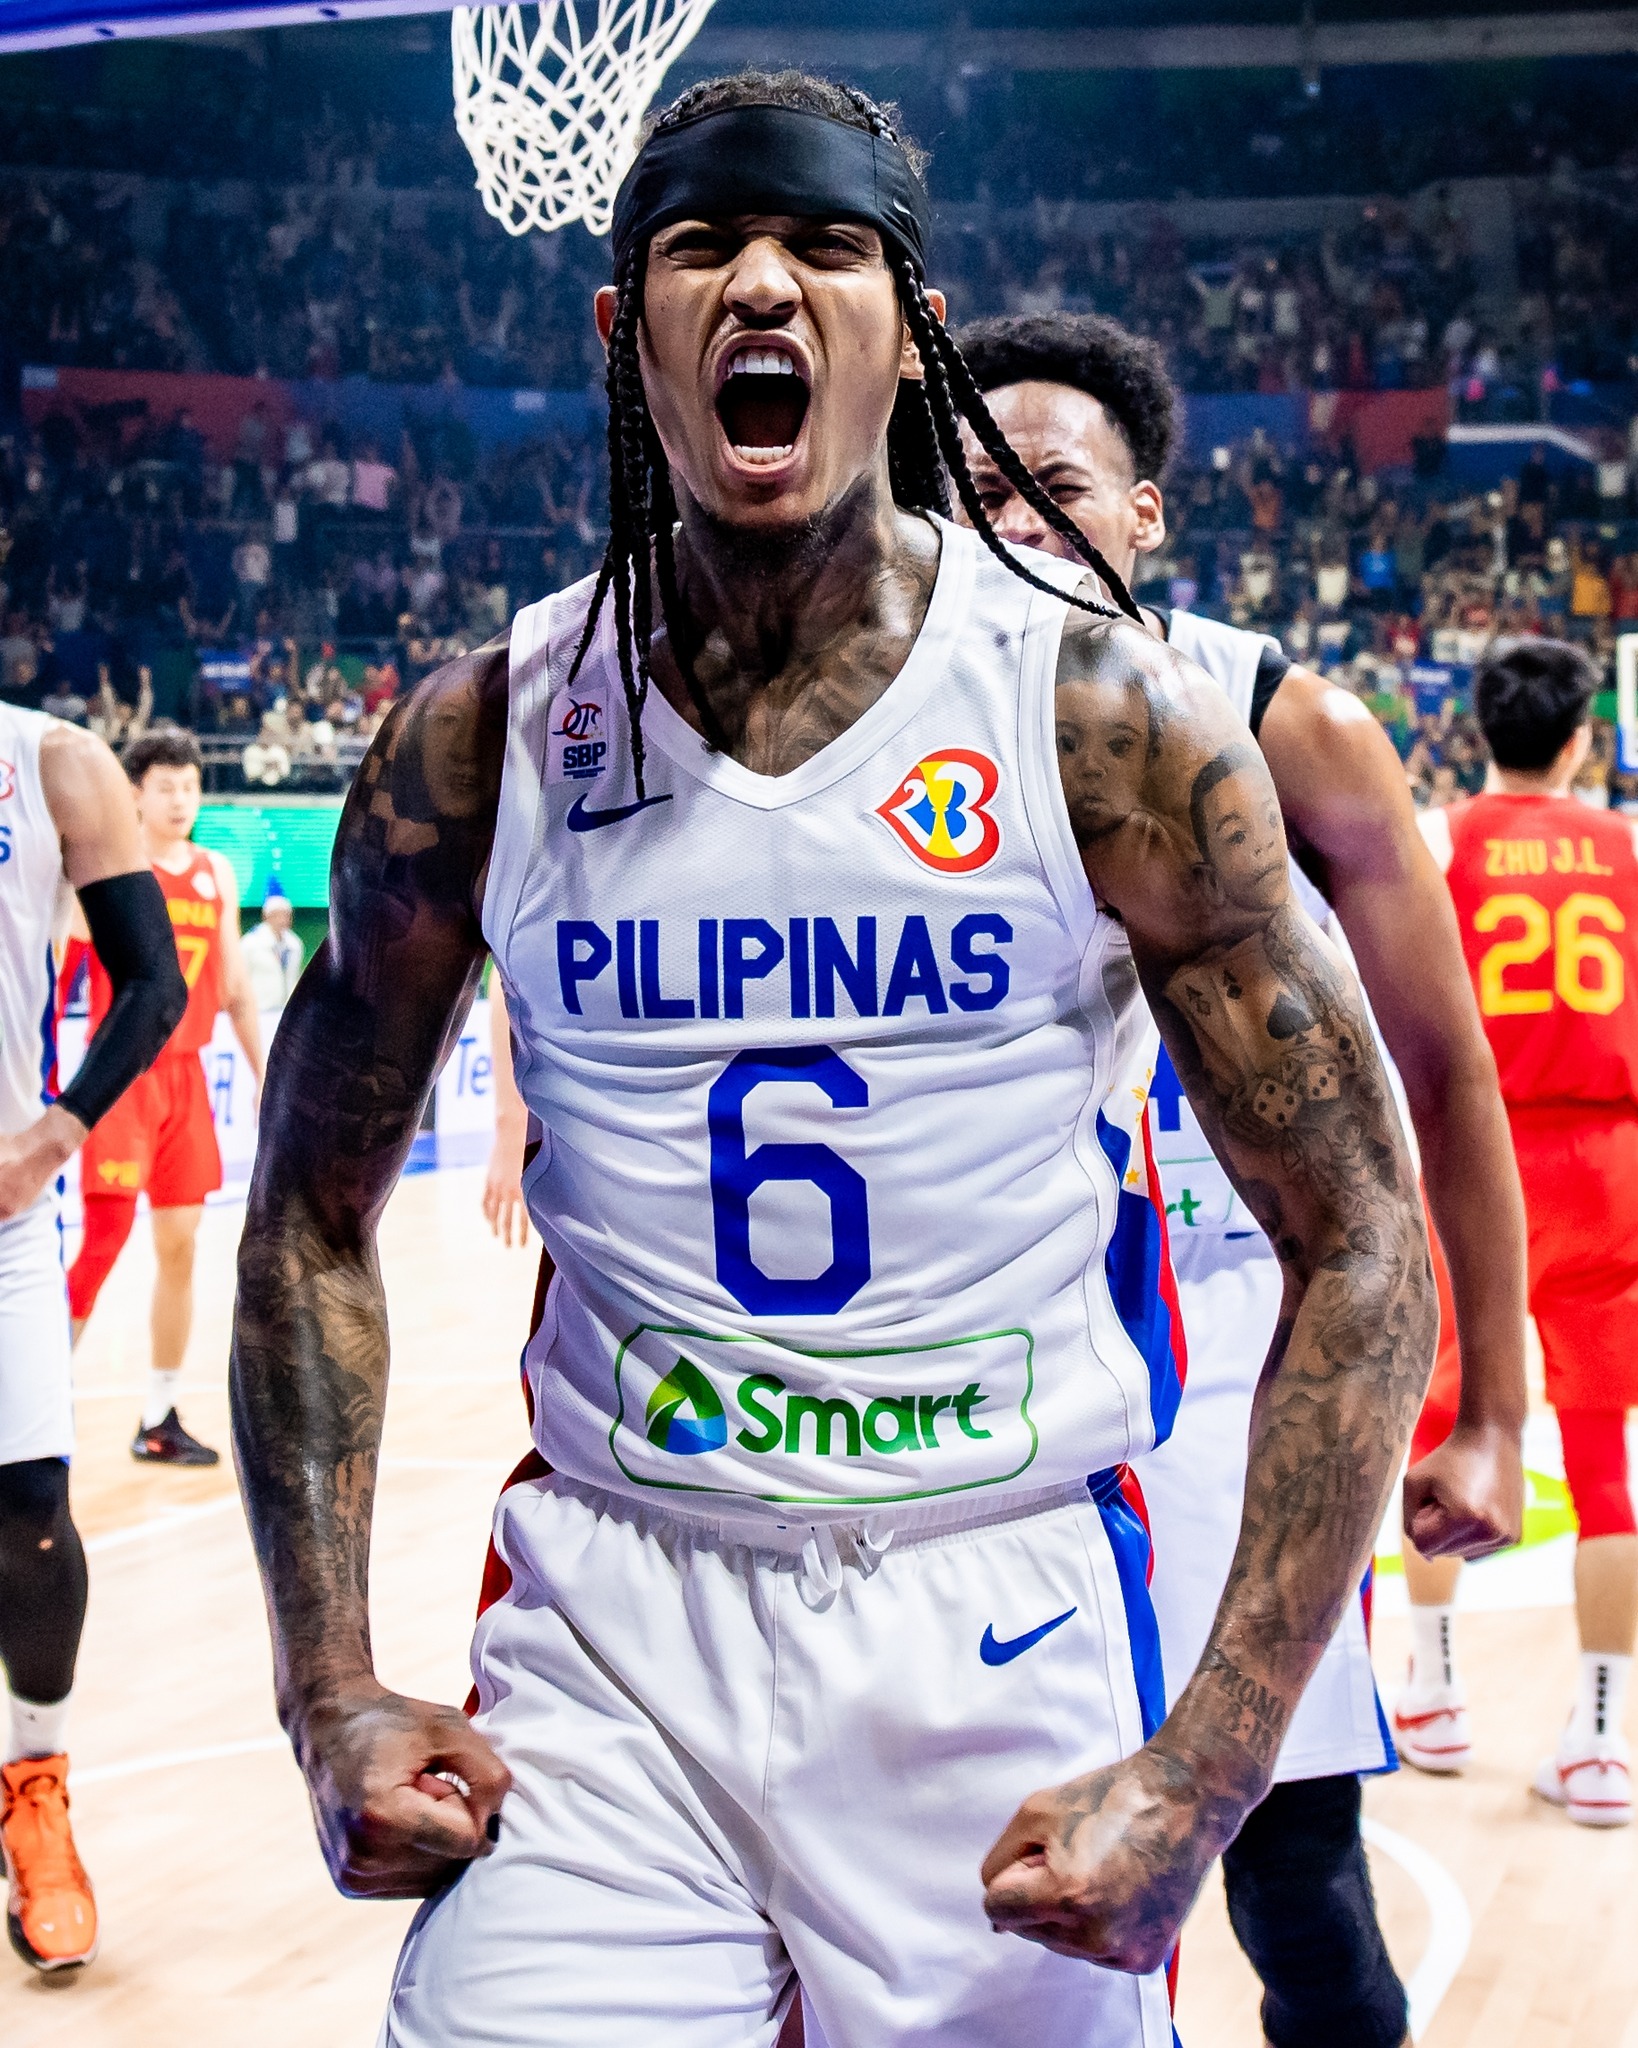 Jordan Clarkson representing the Philippines at the 2023 FIBA World Cup